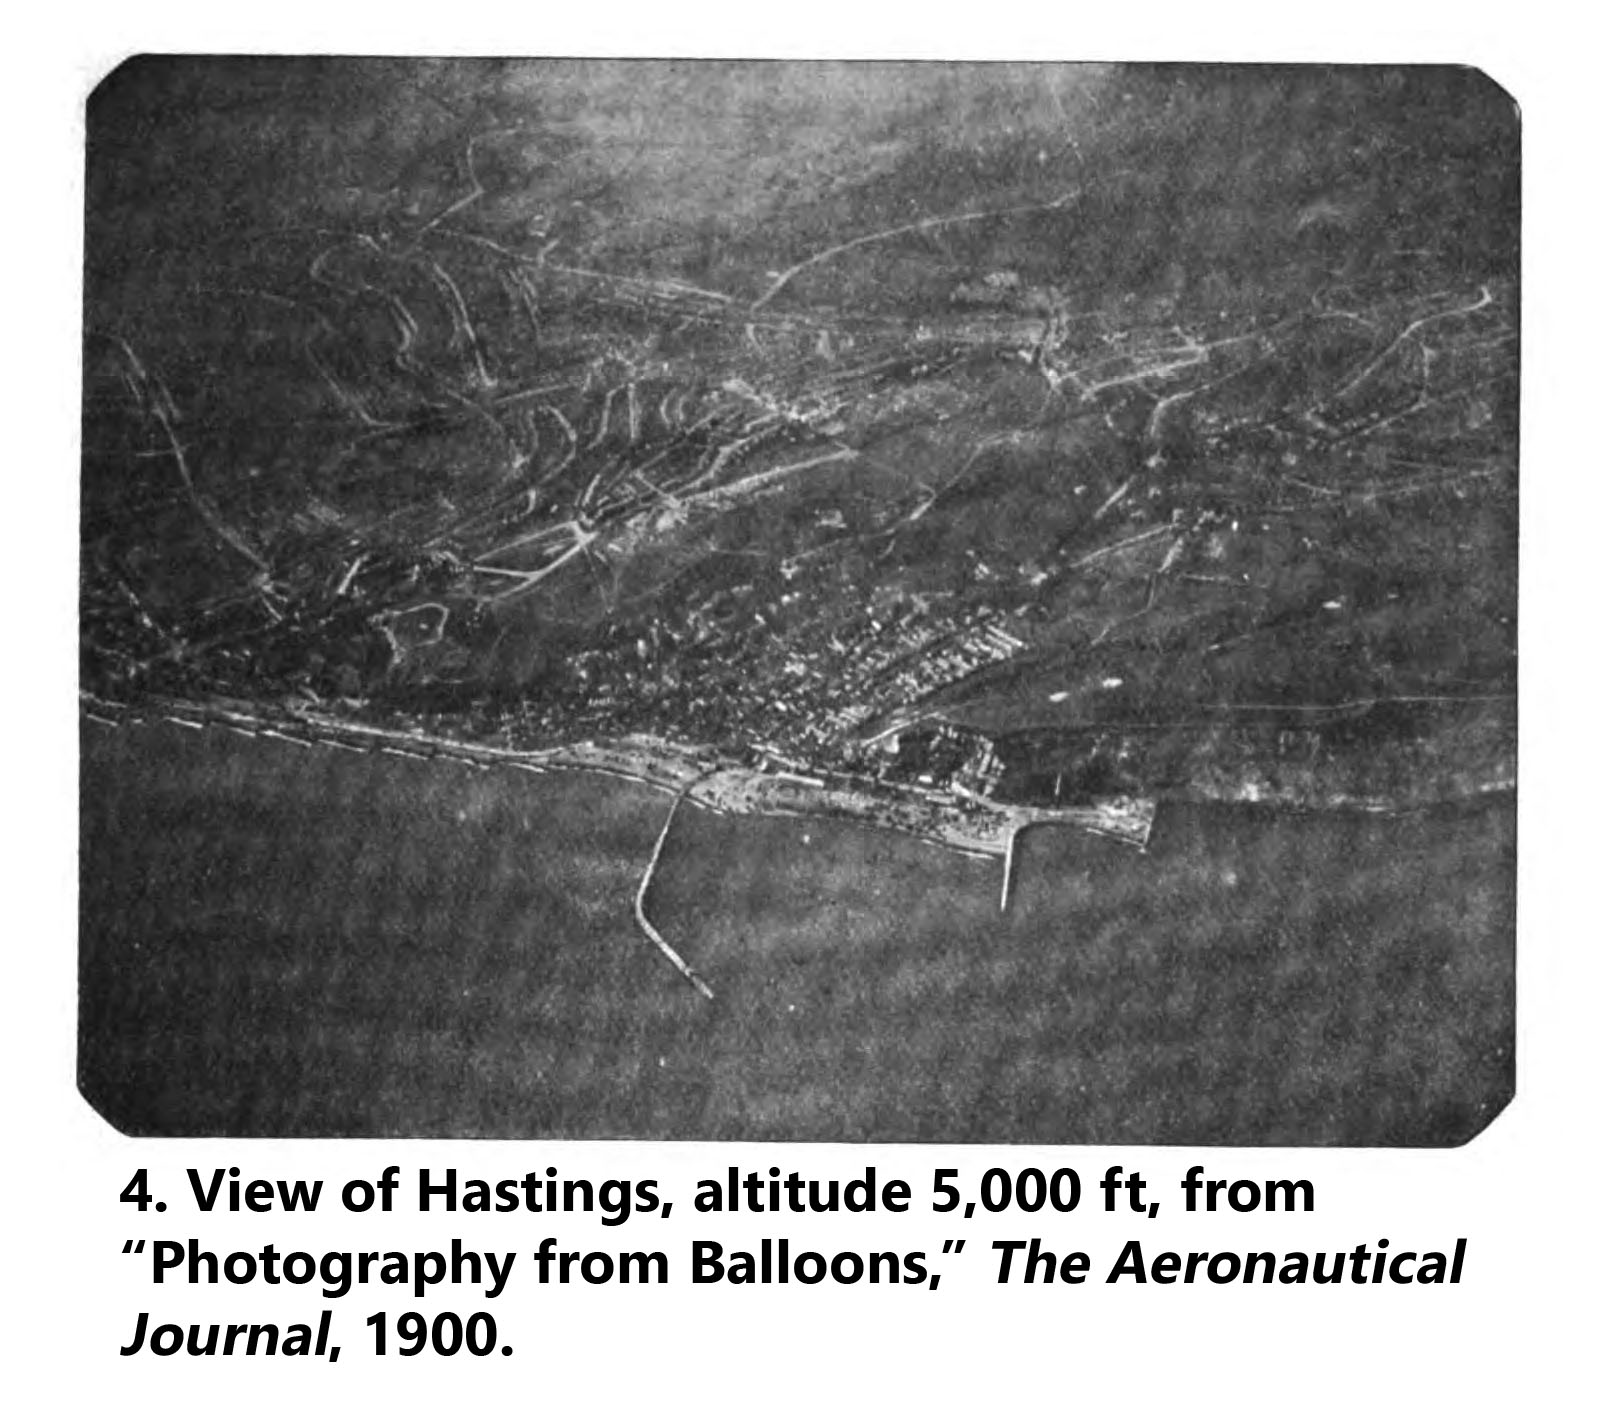 Aerial photo of Hastings, taken from 5,000 ft, 1900